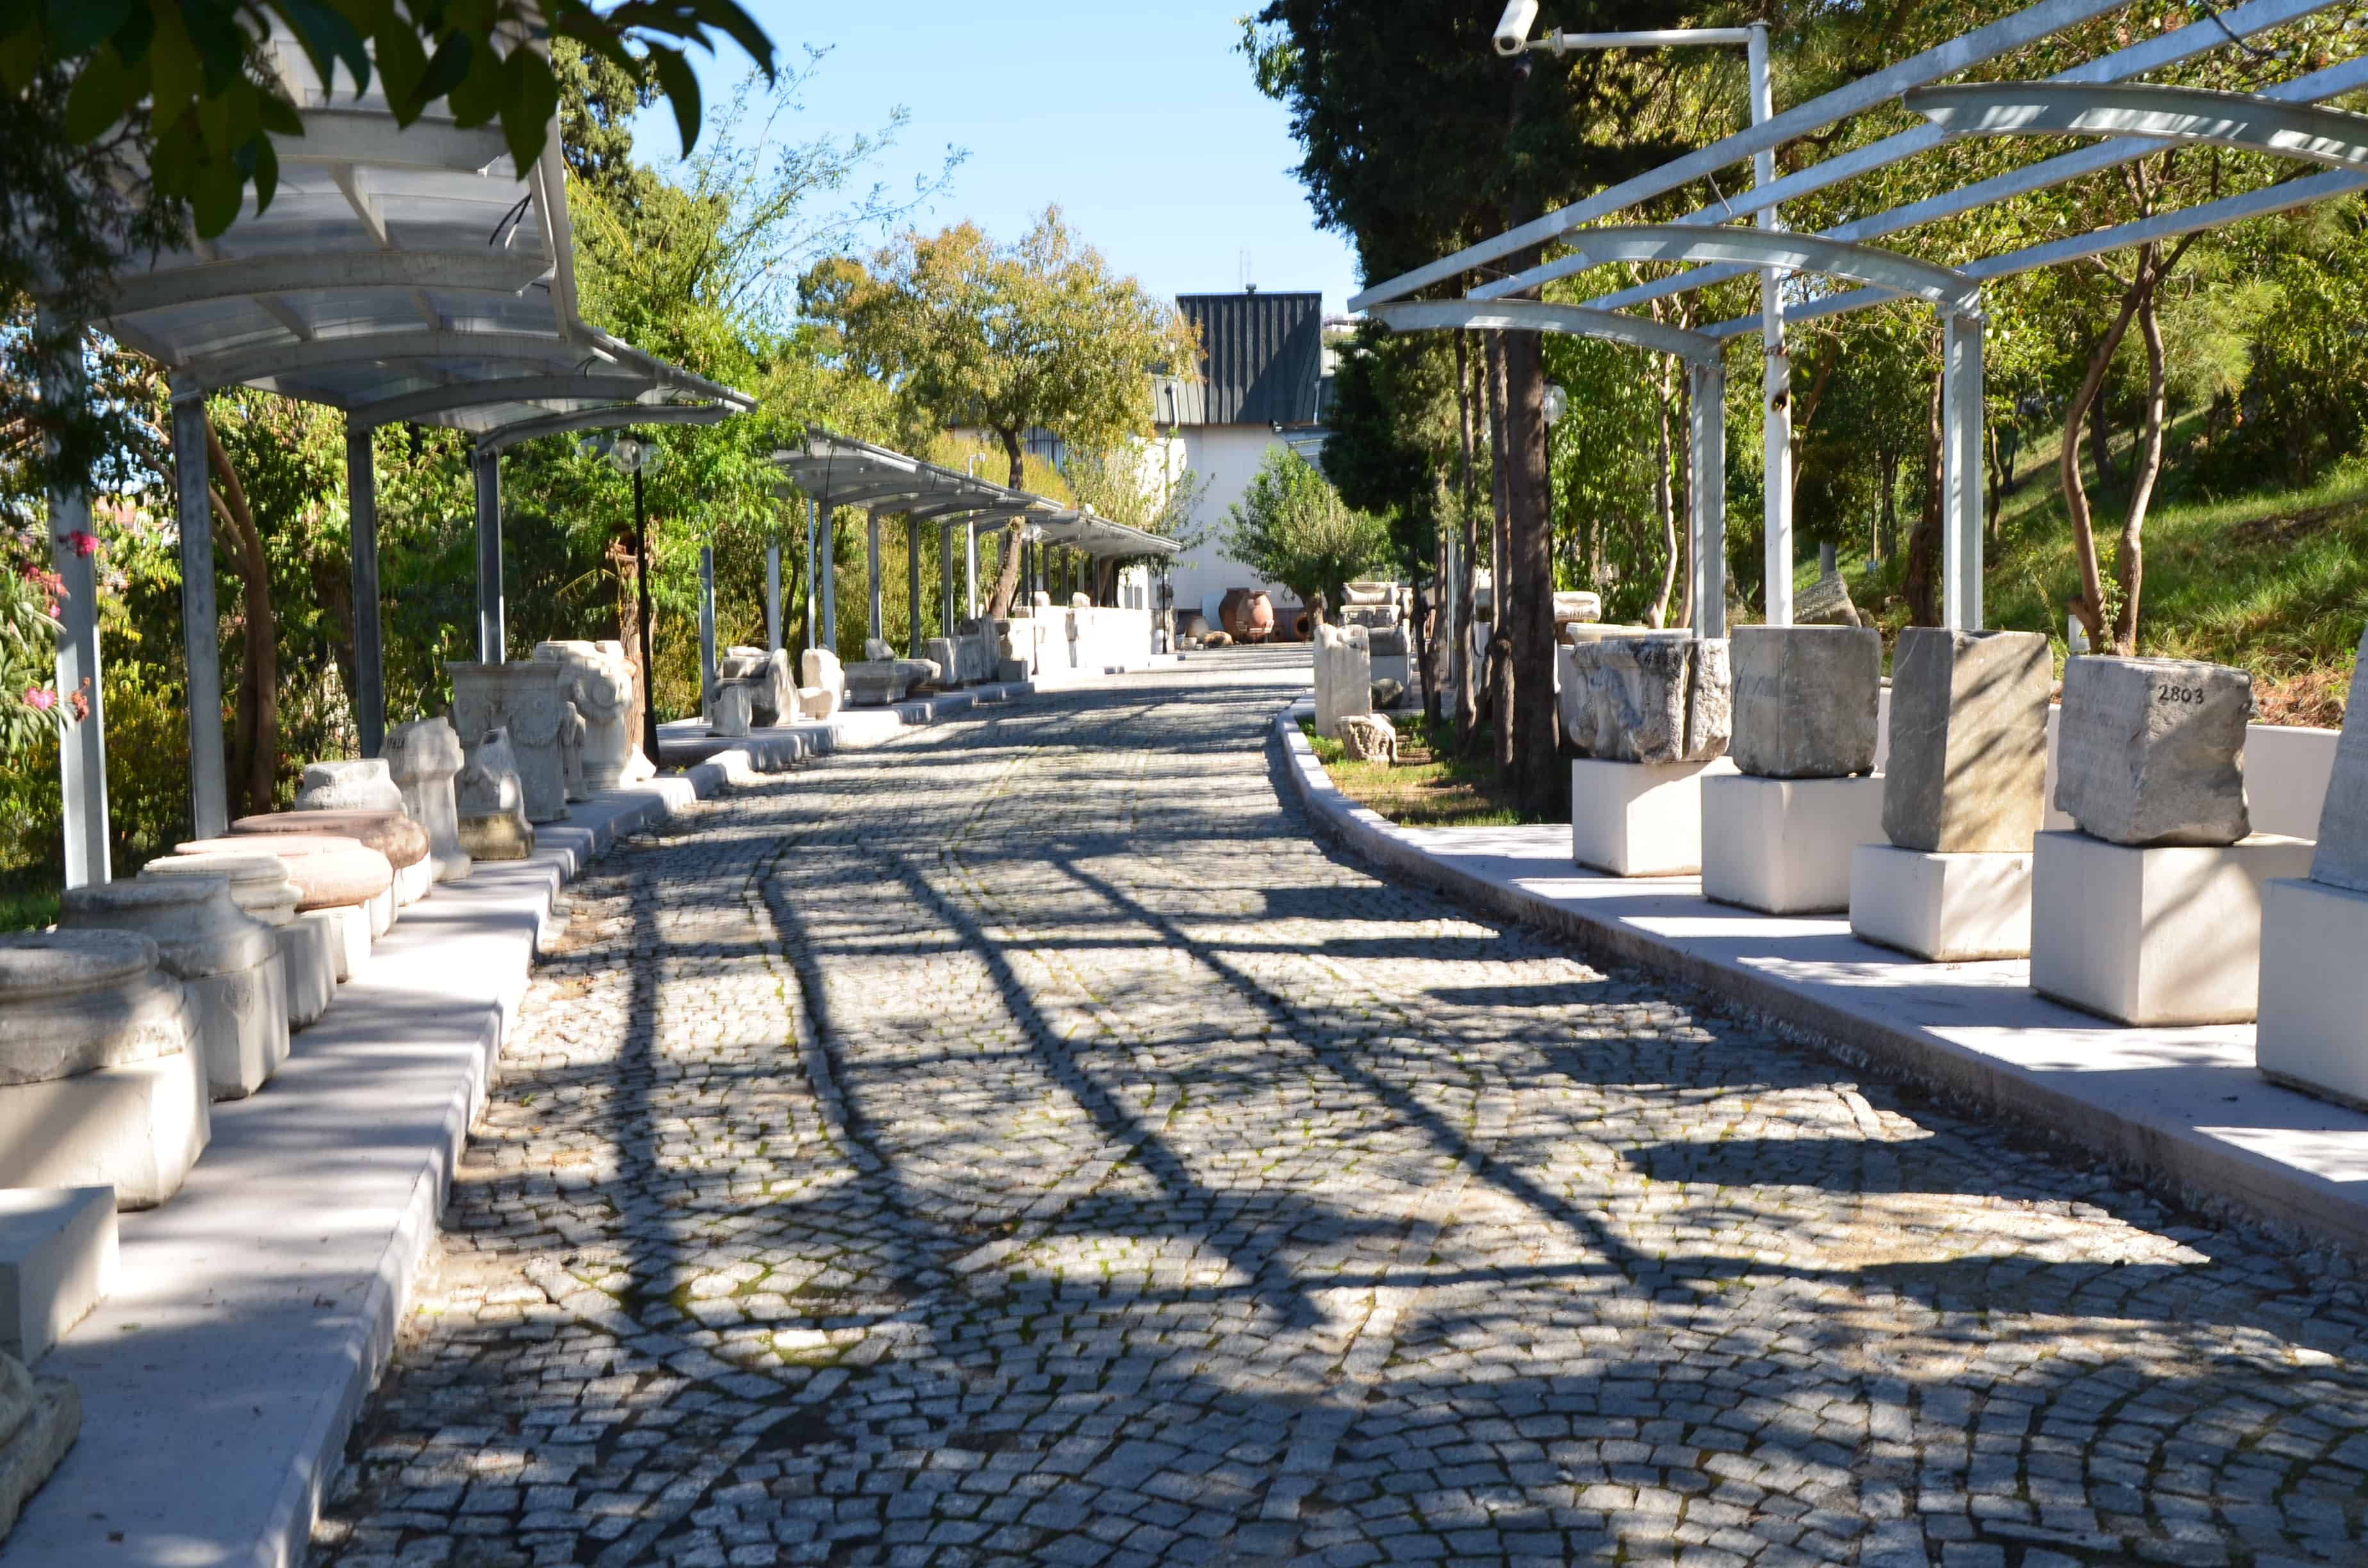 Path lined with pedestals at the Izmir Archaeology Museum in Izmir, Turkey